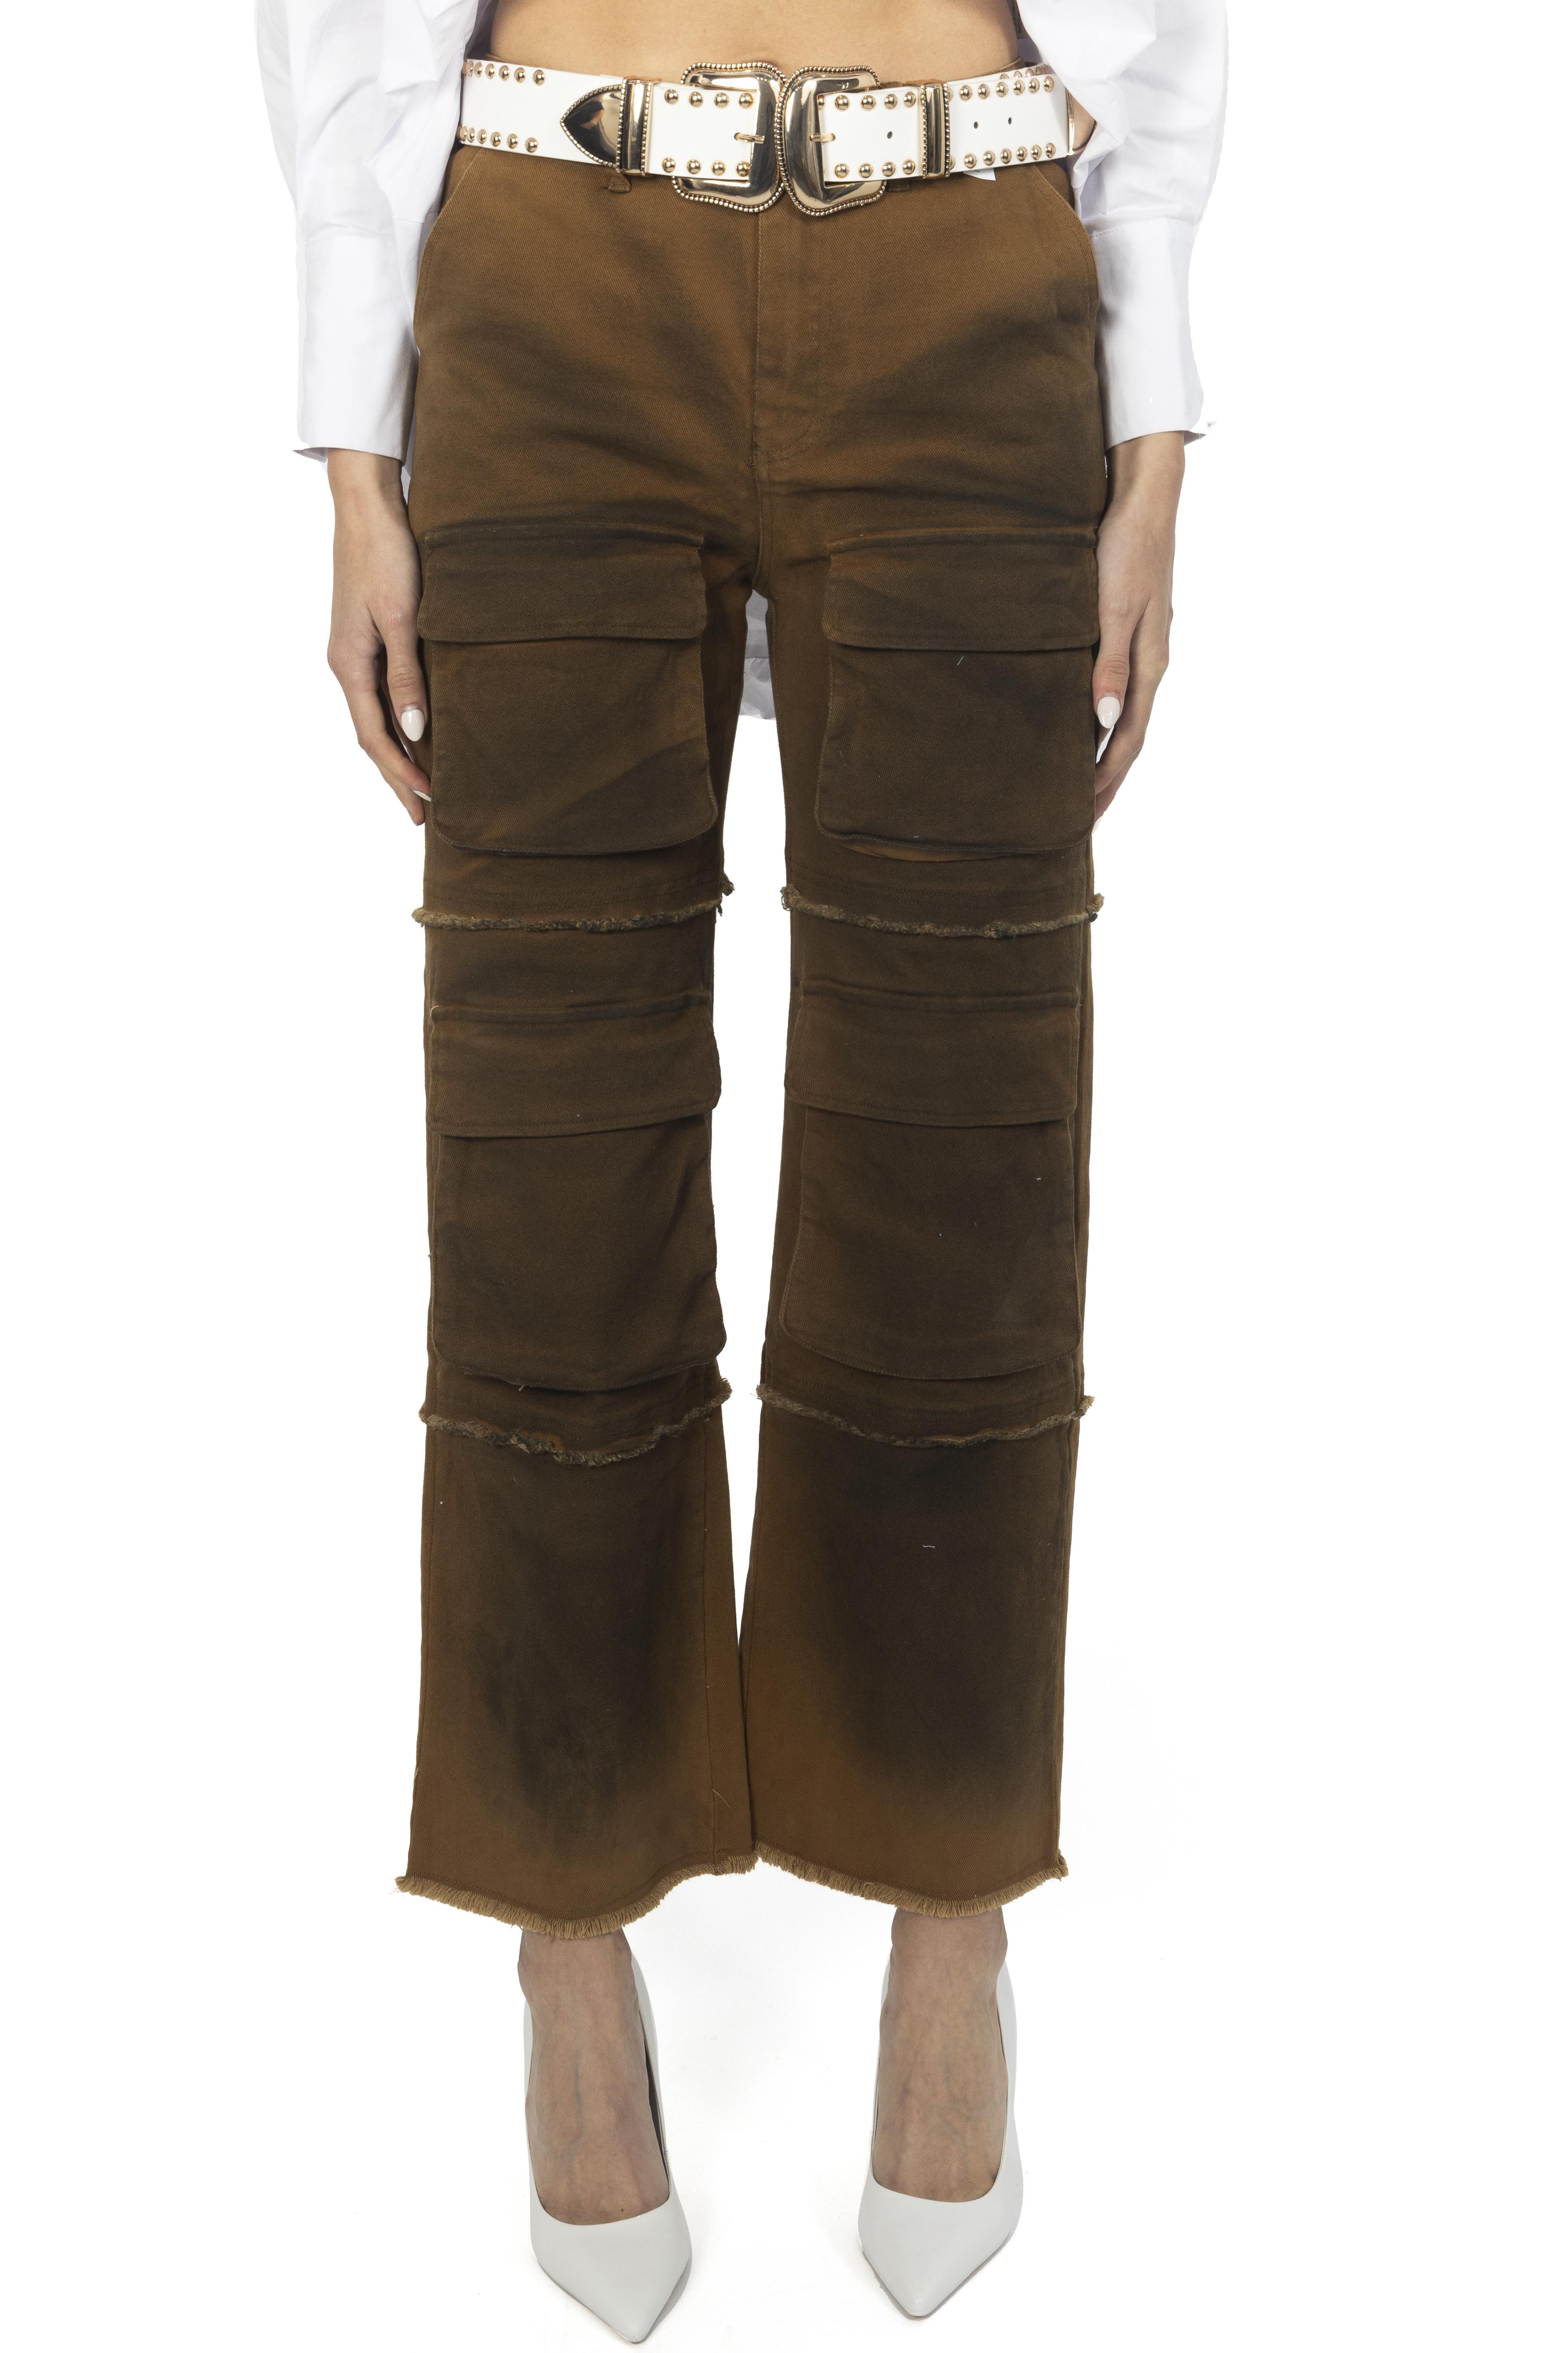 POUCH PERRY PANTS